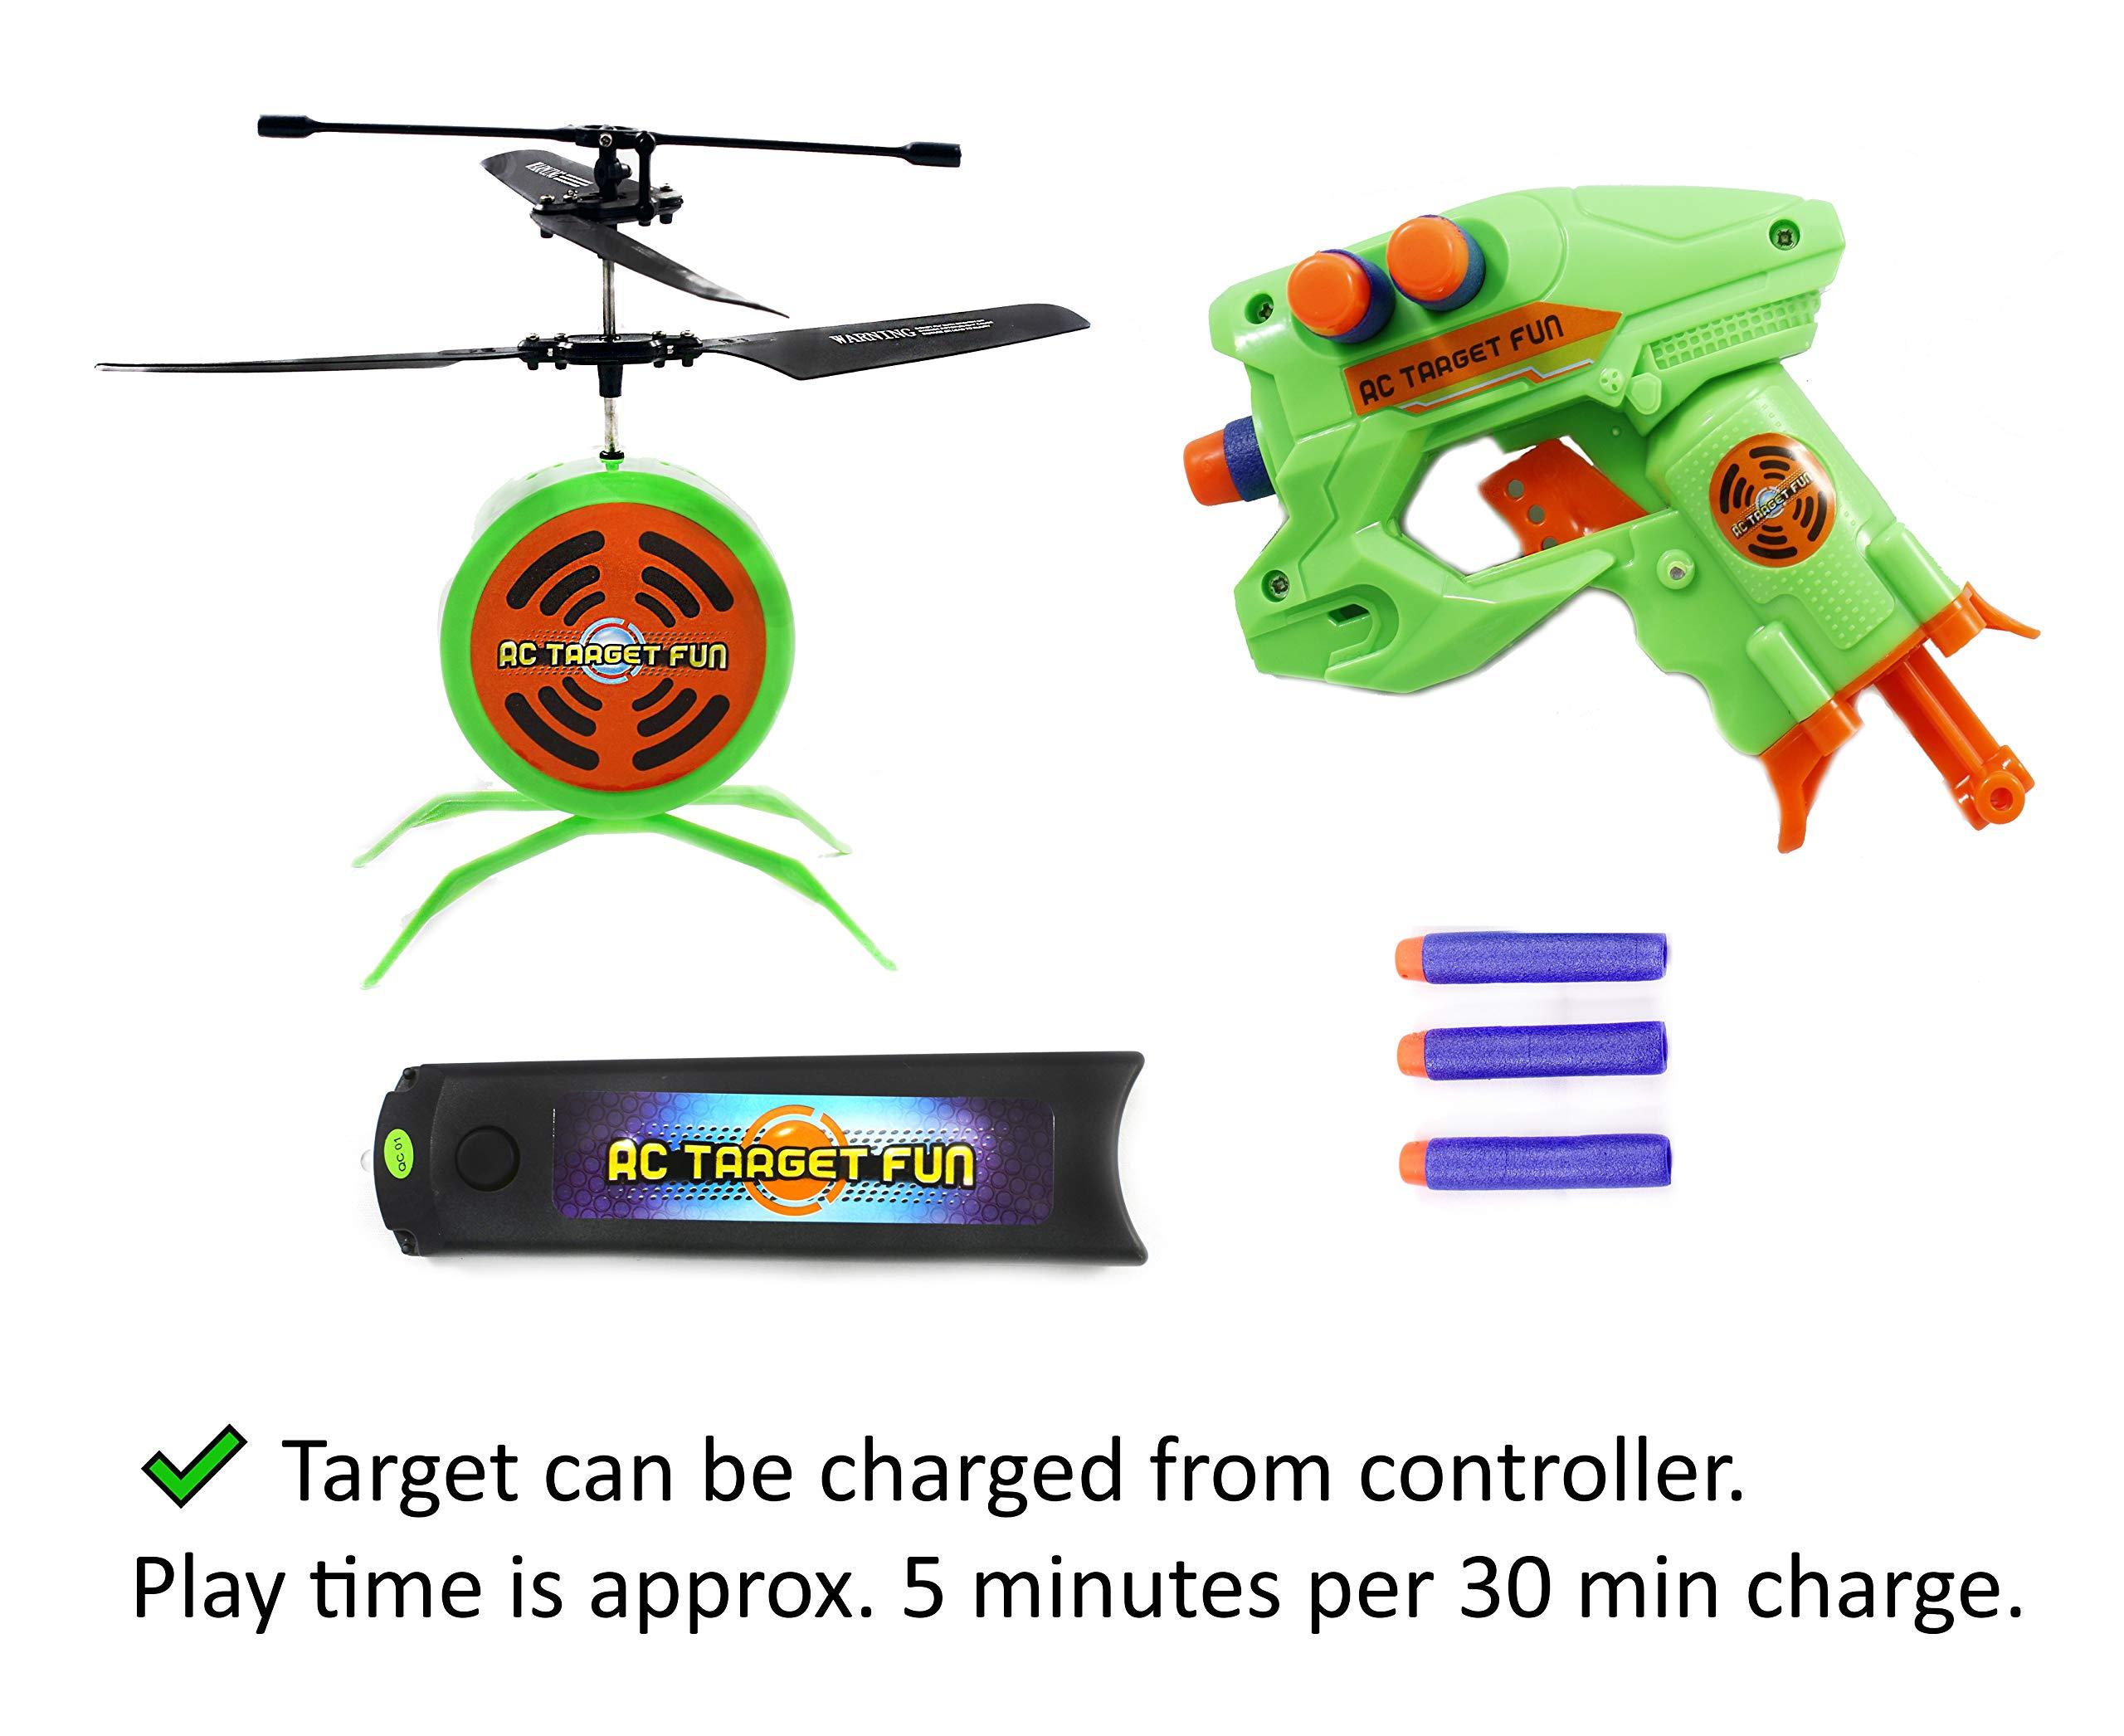 Nerf Rc Plane: Target Market for Nerf RC Planes